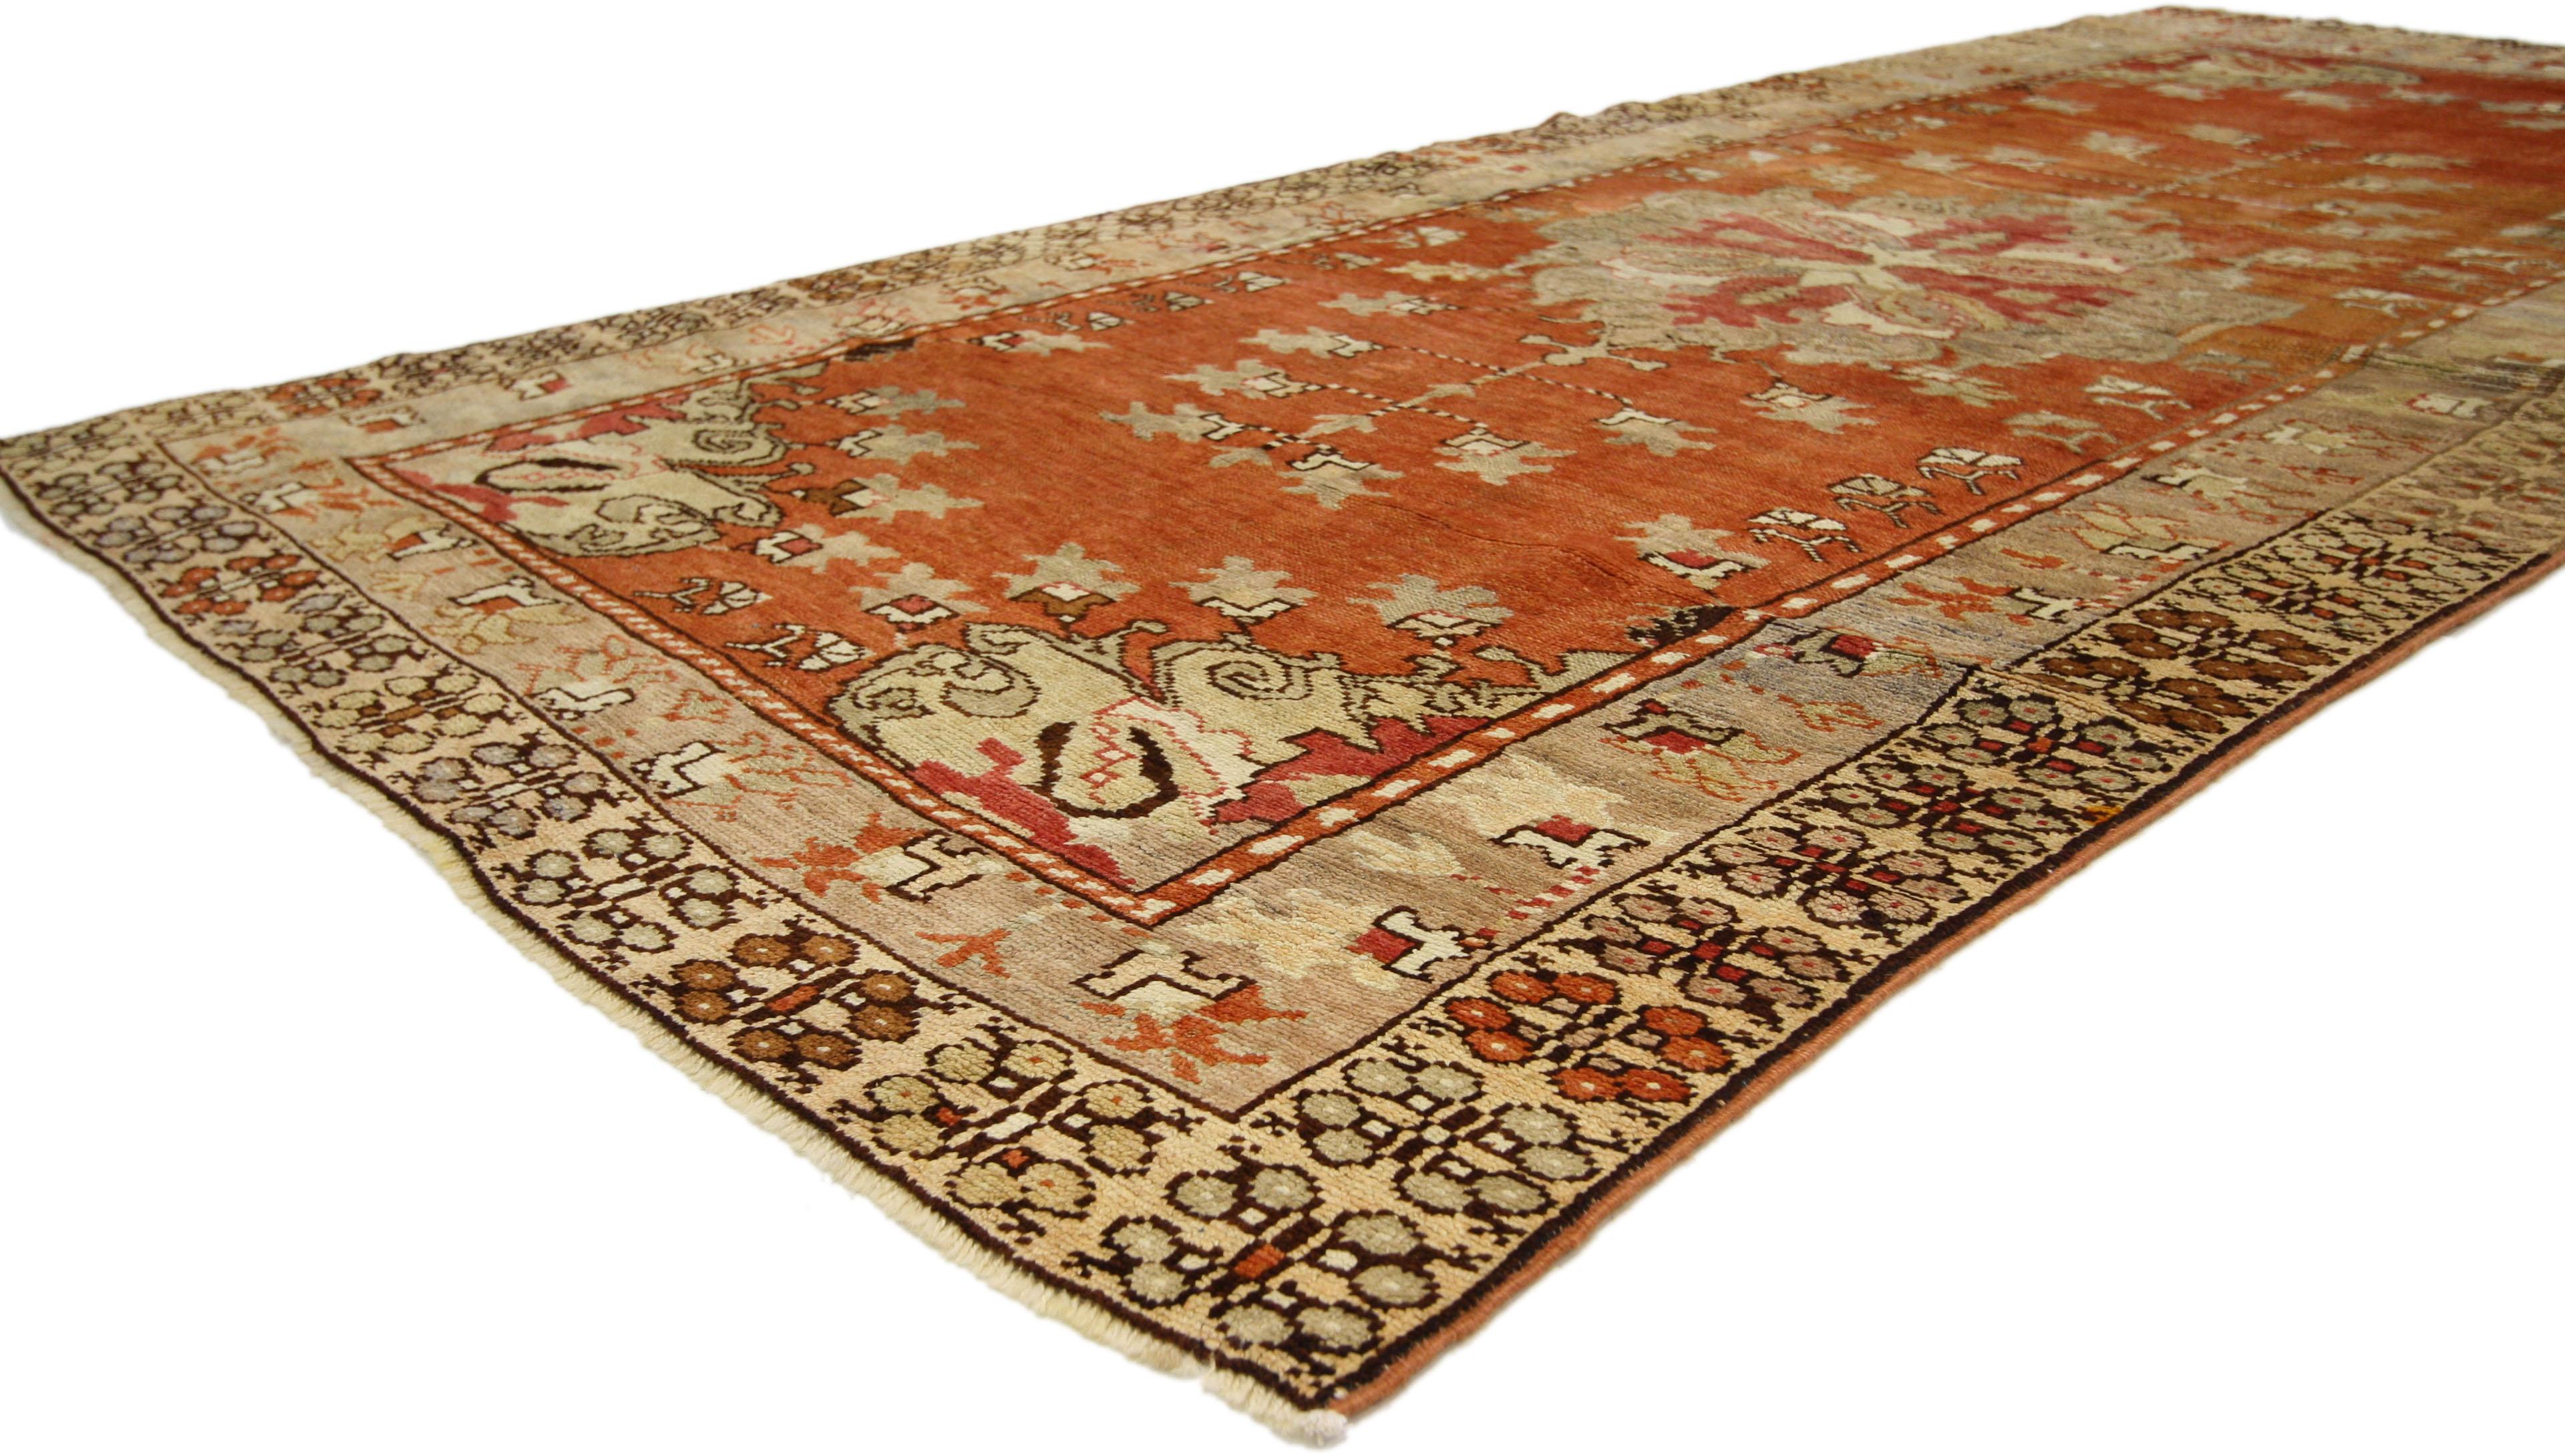 50634 Antique Turkish Oushak Runner with Rustic Cottage Style, Wide Hallway Runner. This hand-knotted wool antique Turkish Oushak runner with Rustic Cottage style features a center medallion with a tree of life design on either end. It is enclosed